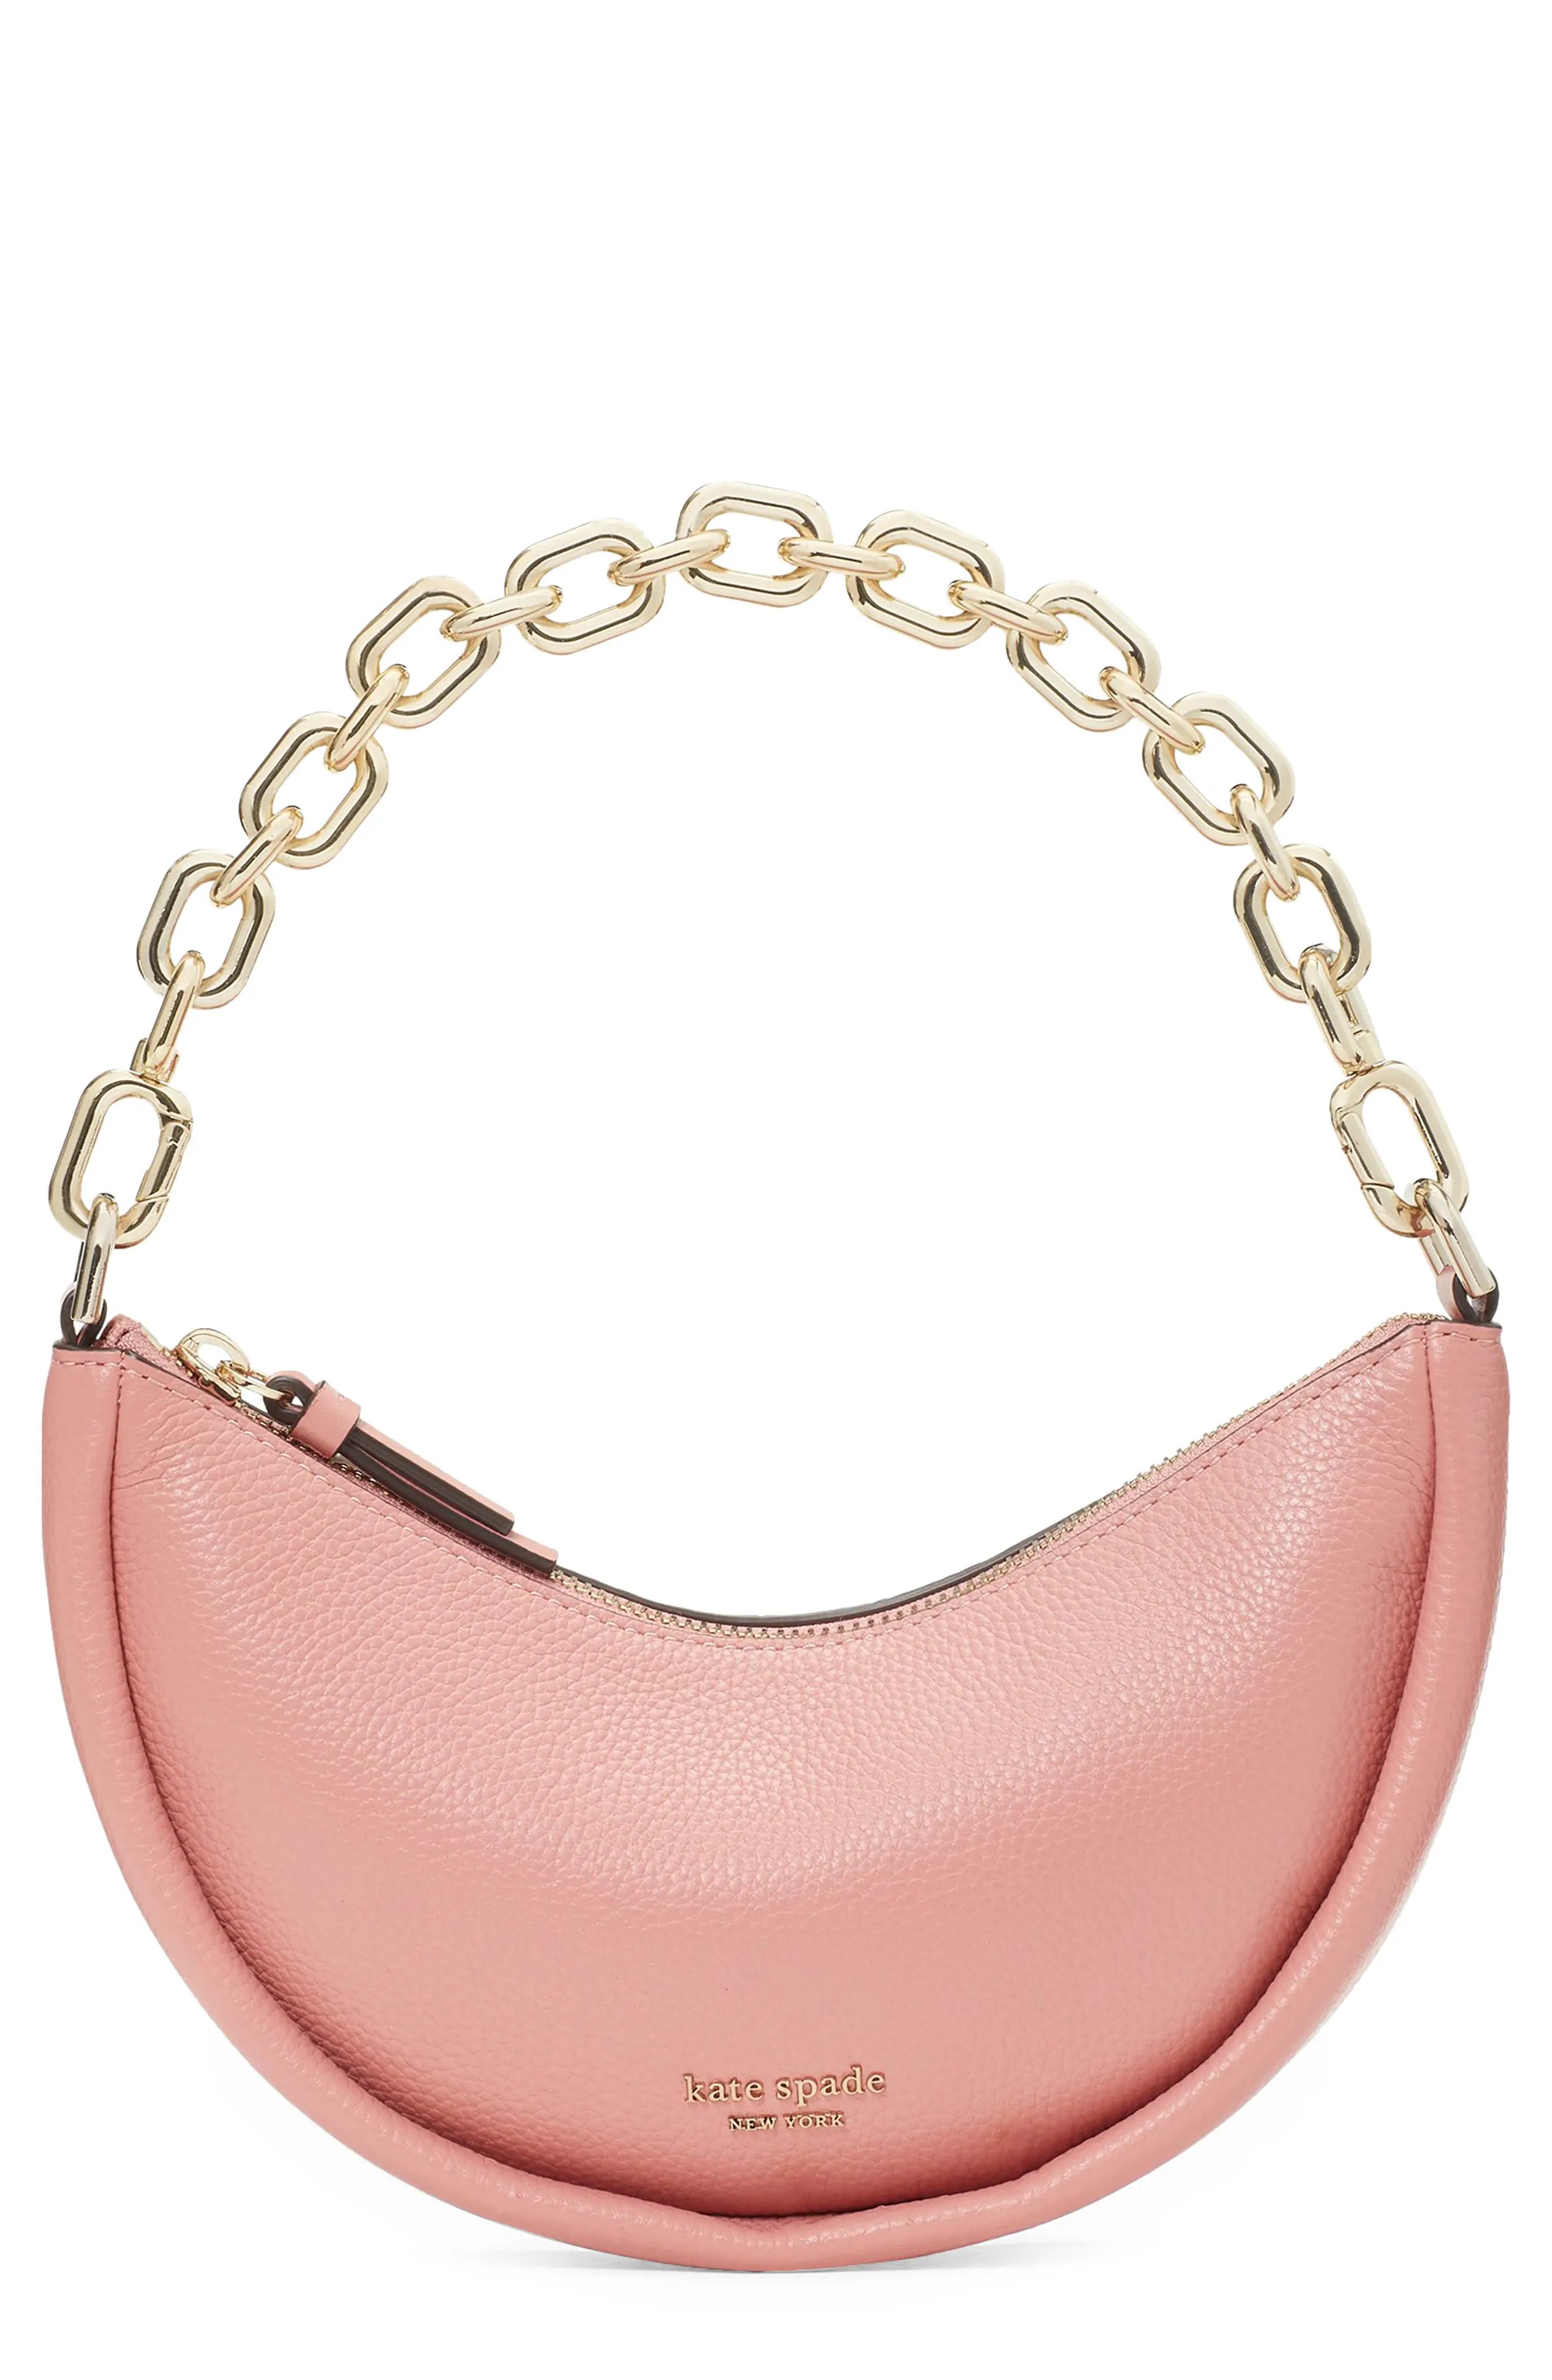 kate spade new york small smile pebbled leather crossbody bag in Serene Pink at Nordstrom | Nordstrom